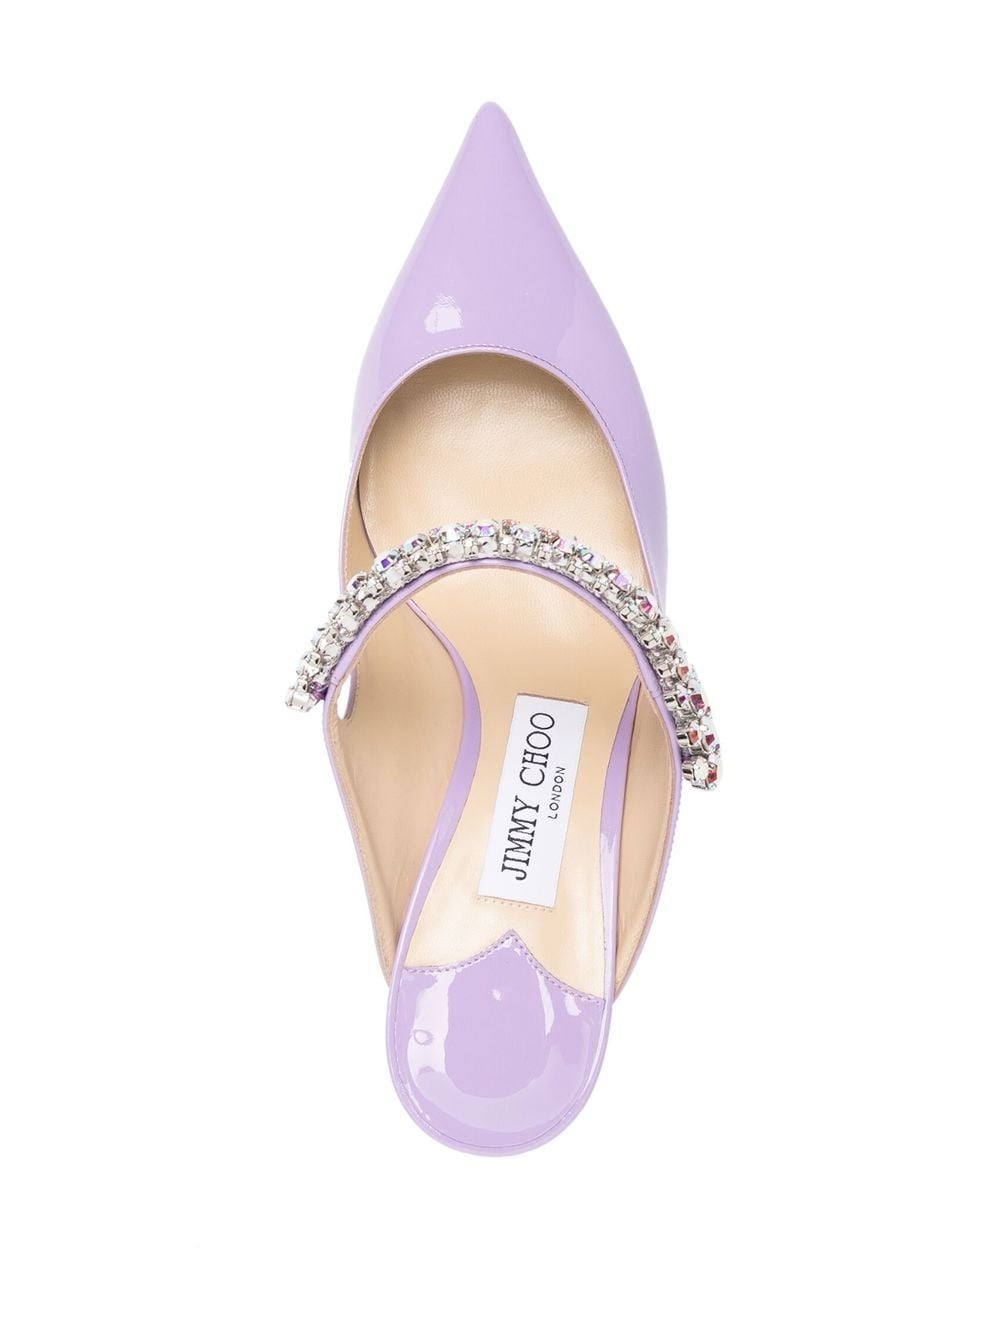 Bing 65 crystal strap patent leather mules - 4